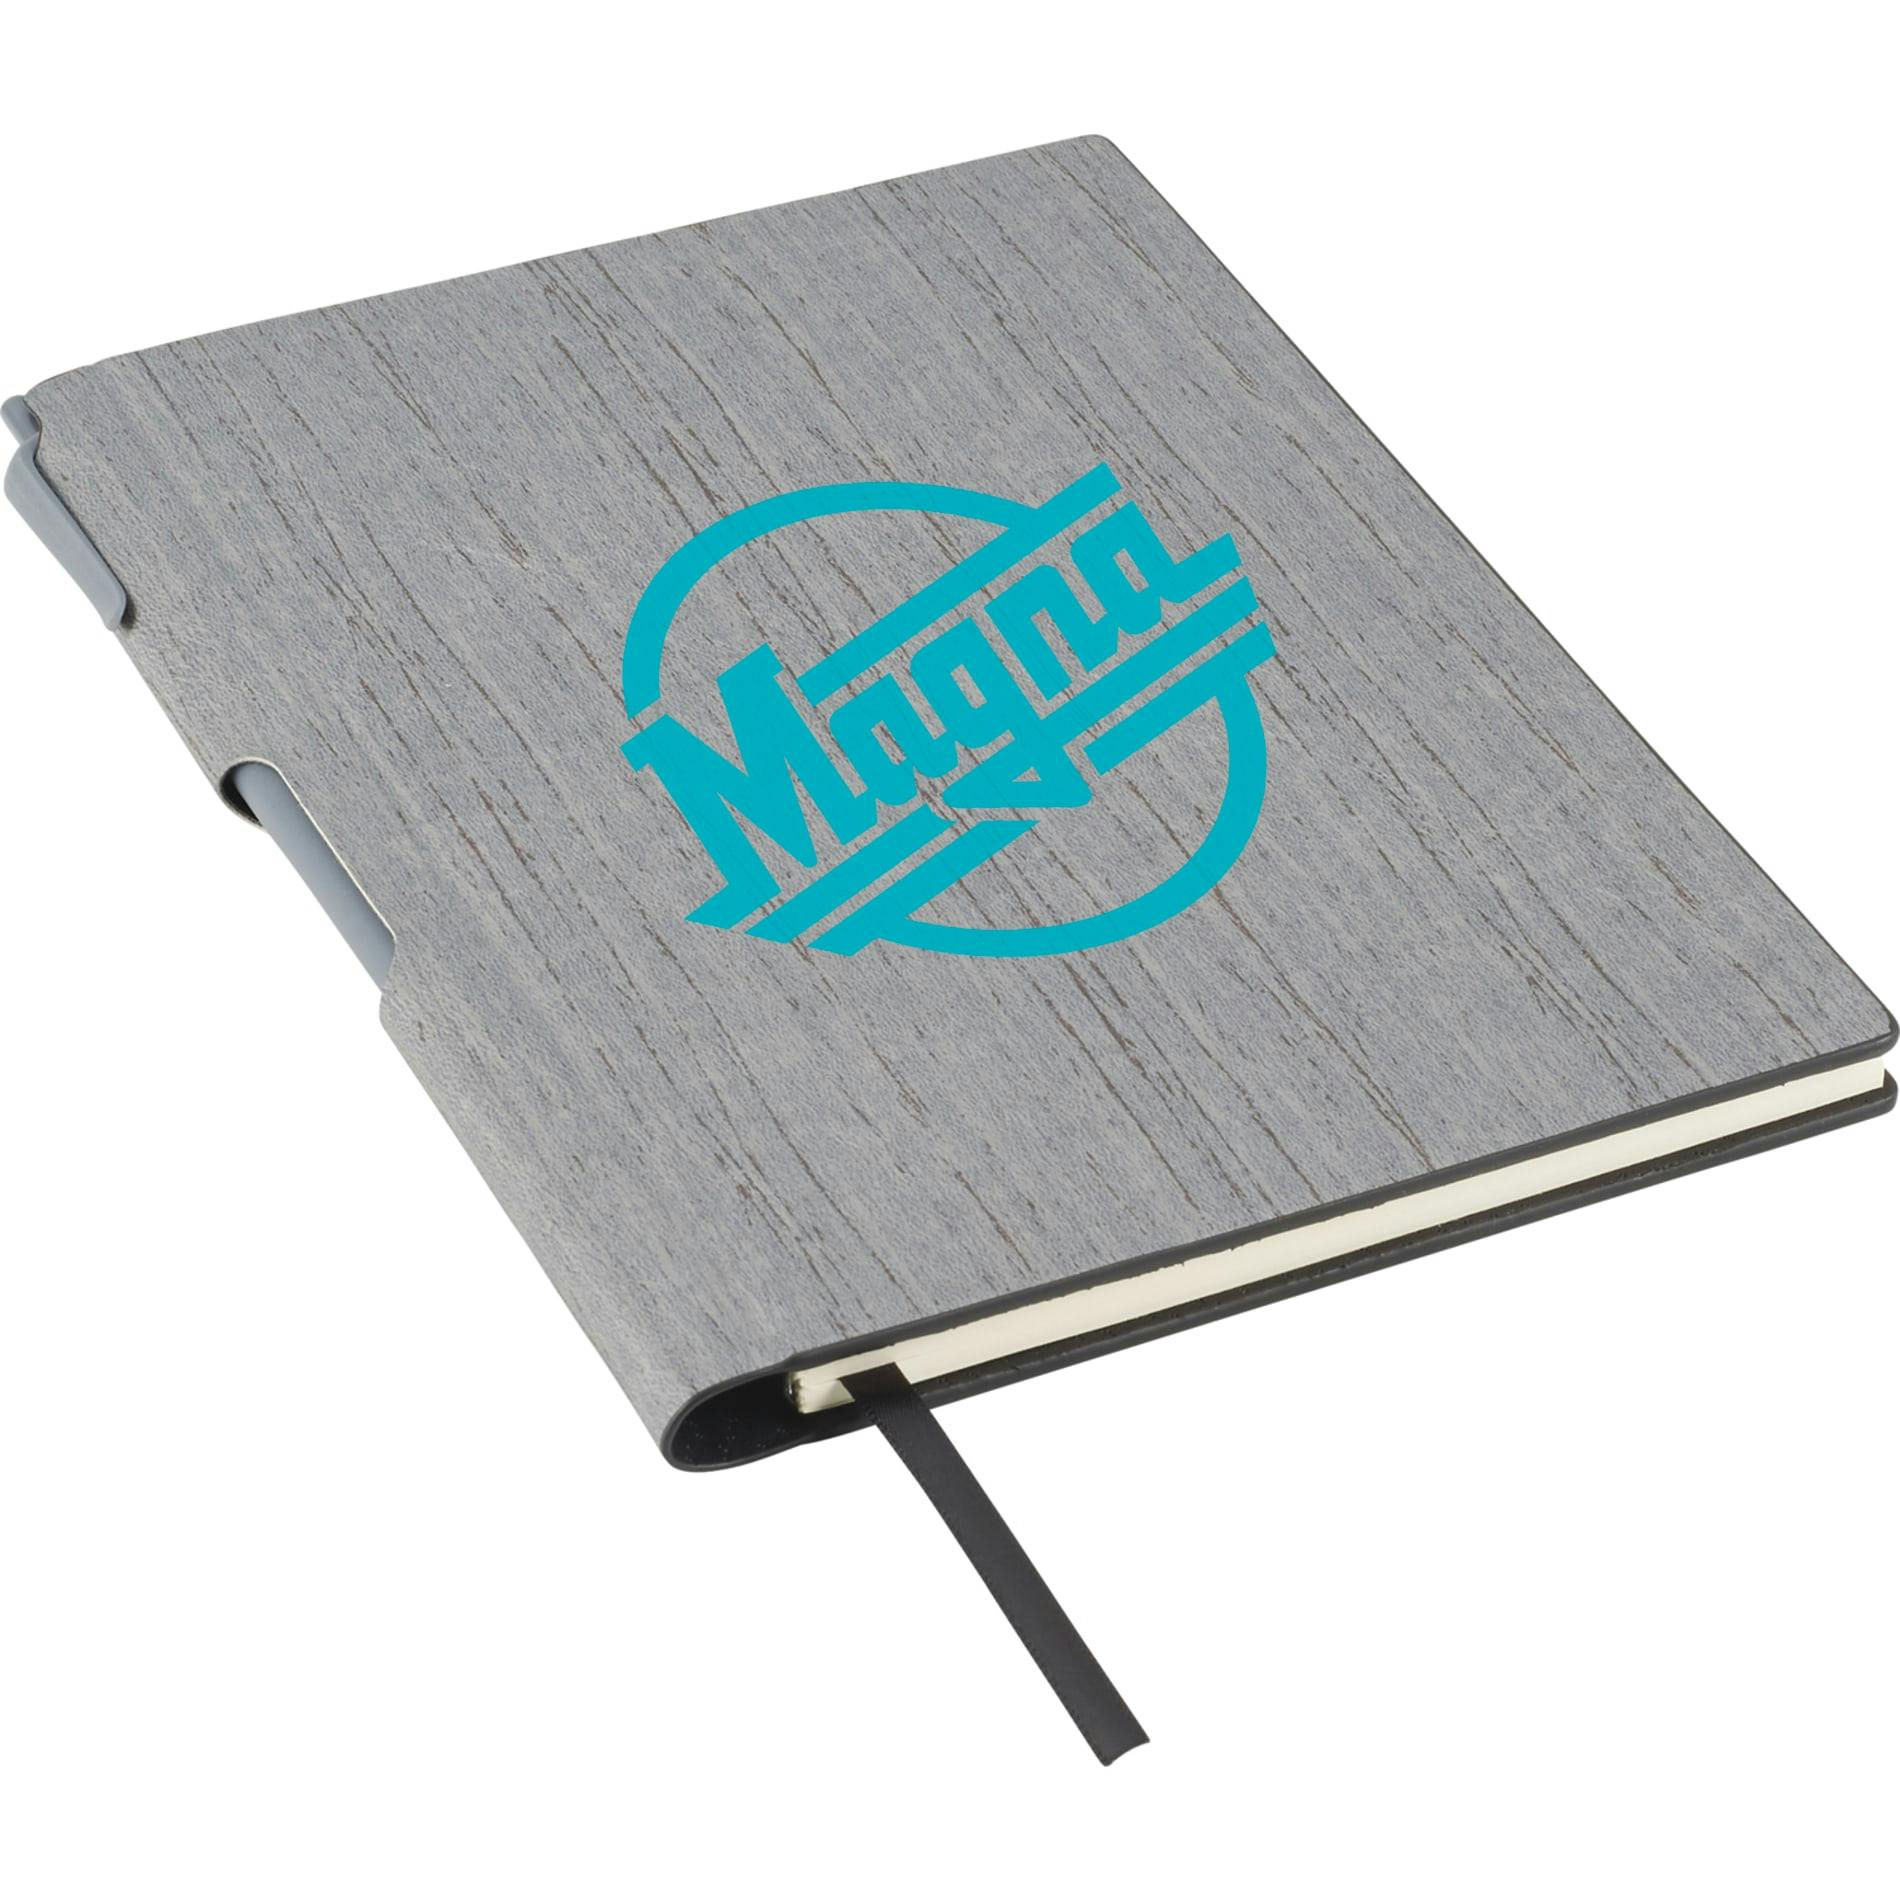 6" x 8.5" Bari Notebook with Pen - additional Image 2